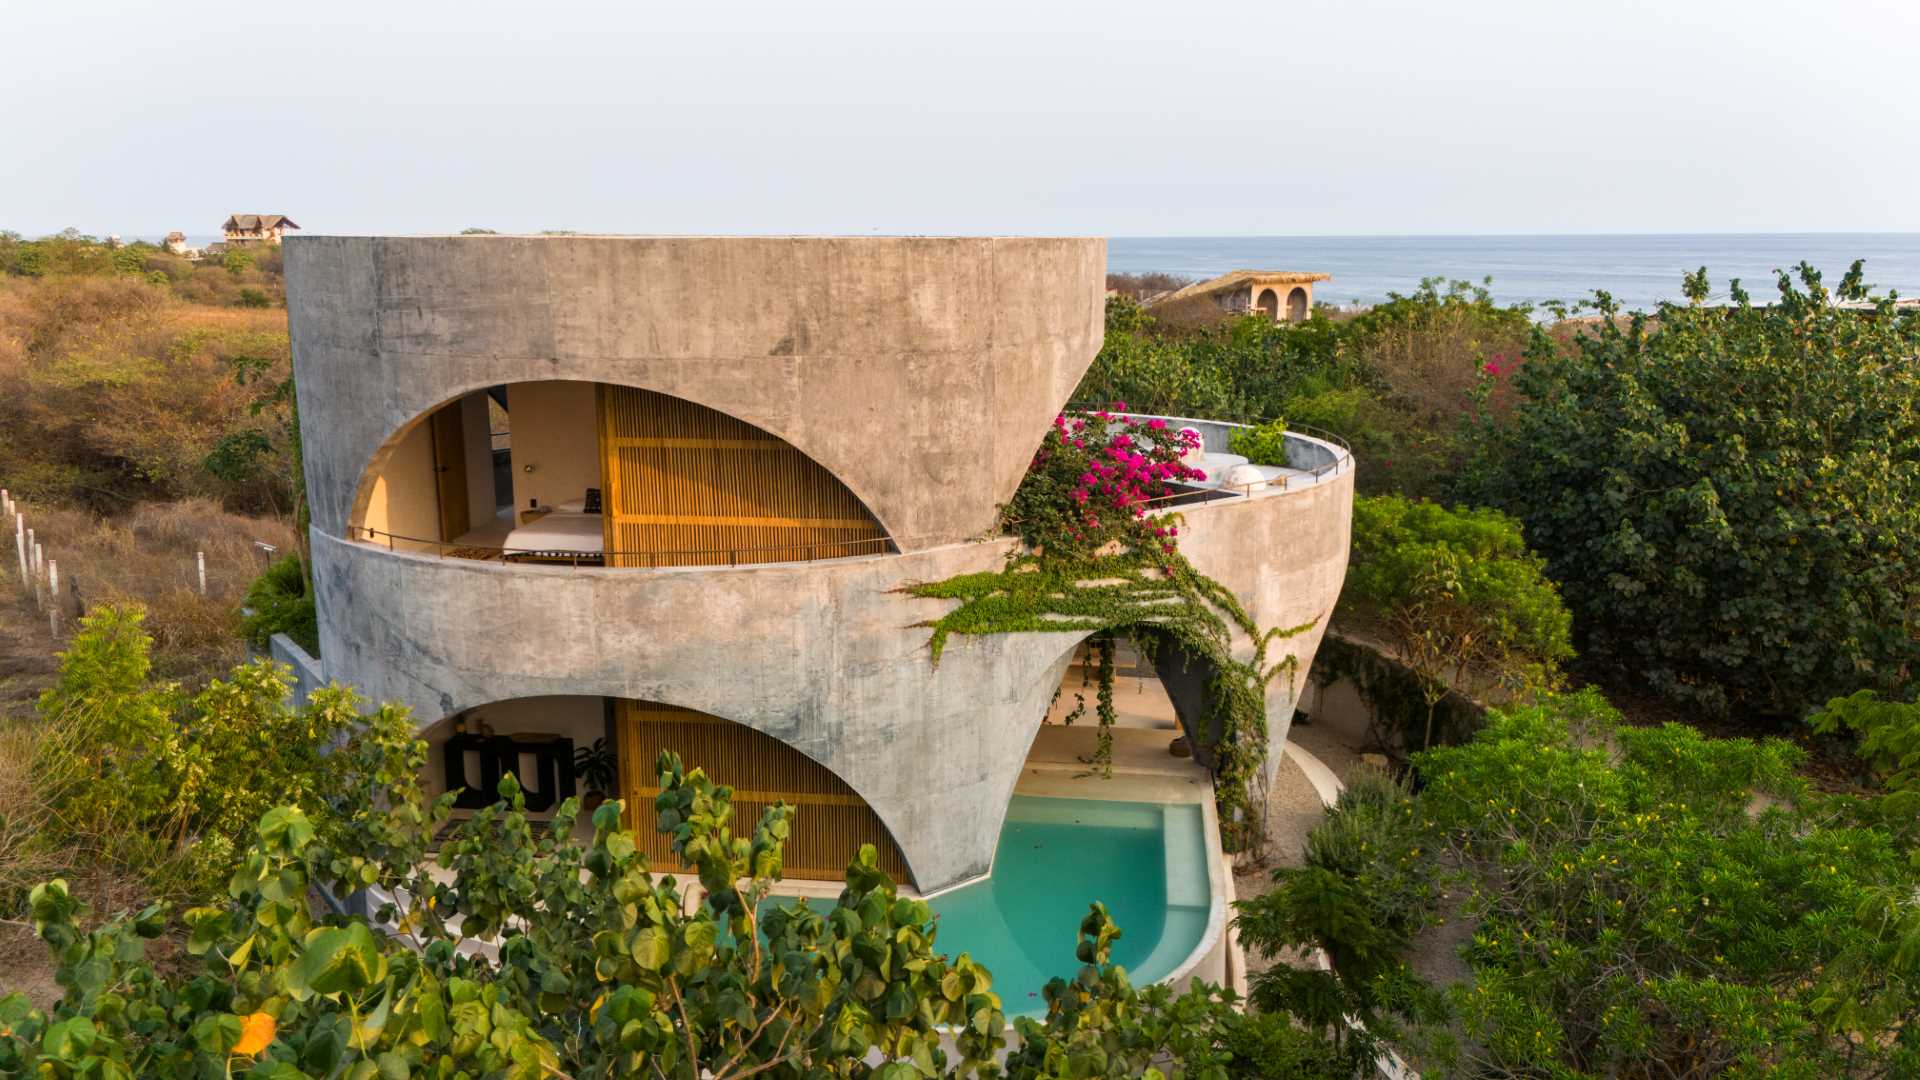 A modern concrete home with a round design and open arches.